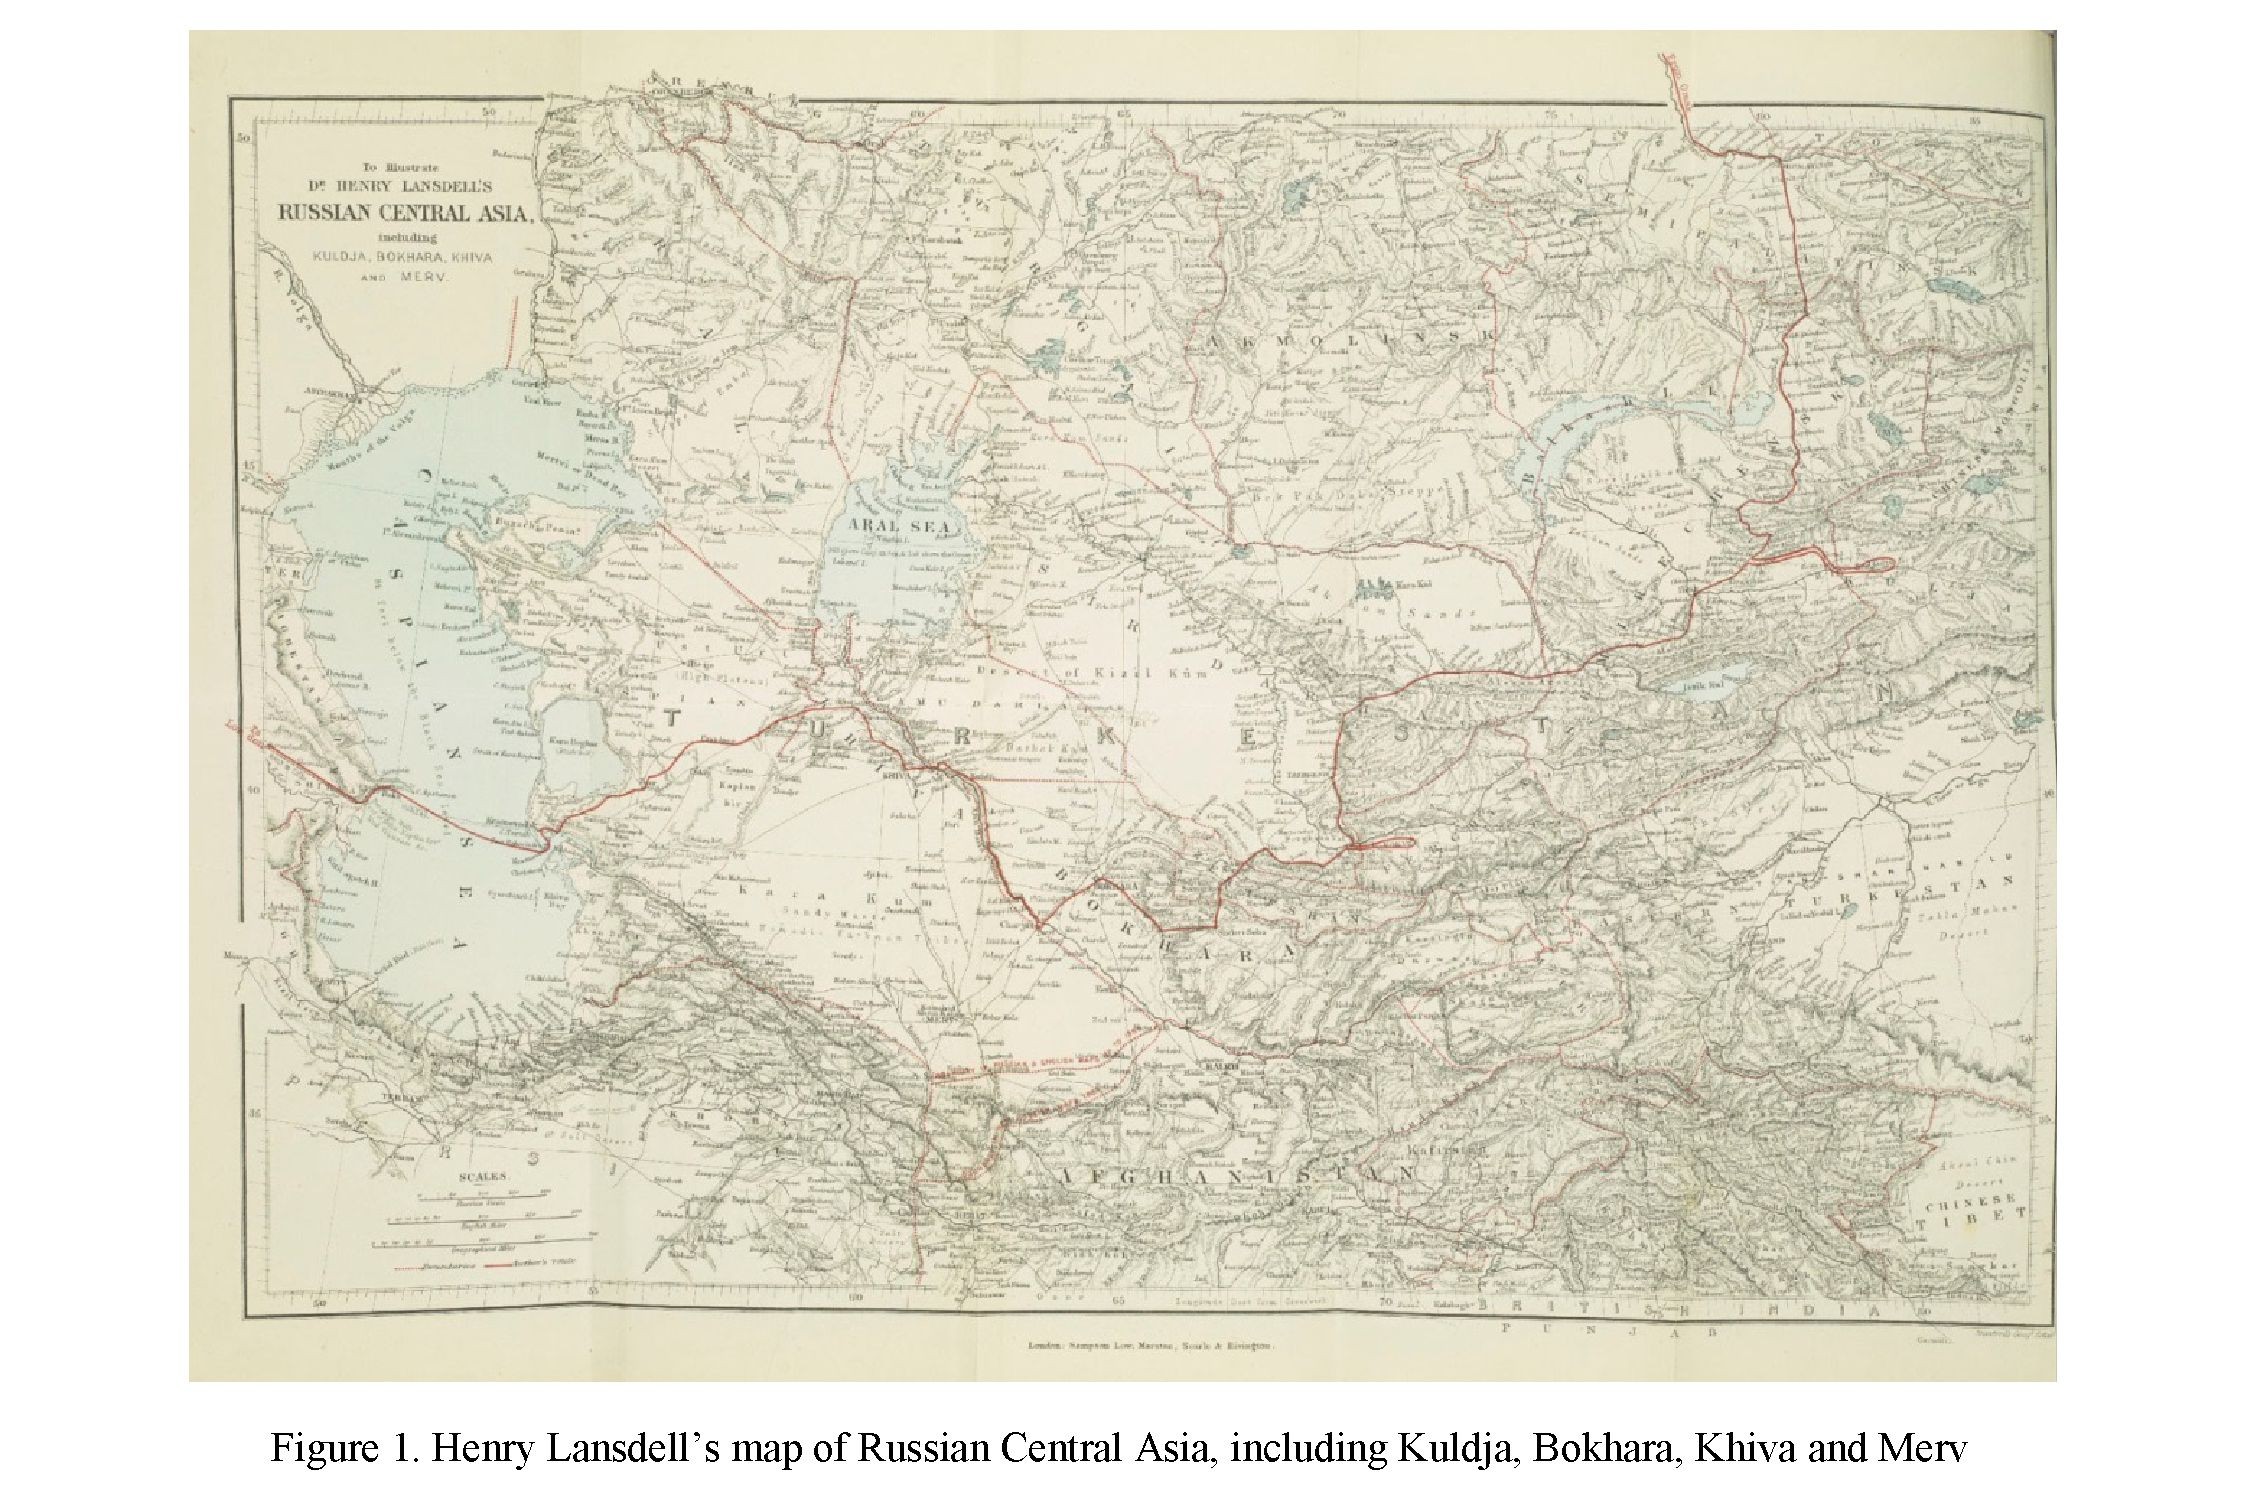 The research of Henry Lansdell «Russian Central Asia» of 1885 as one of the primary source materials